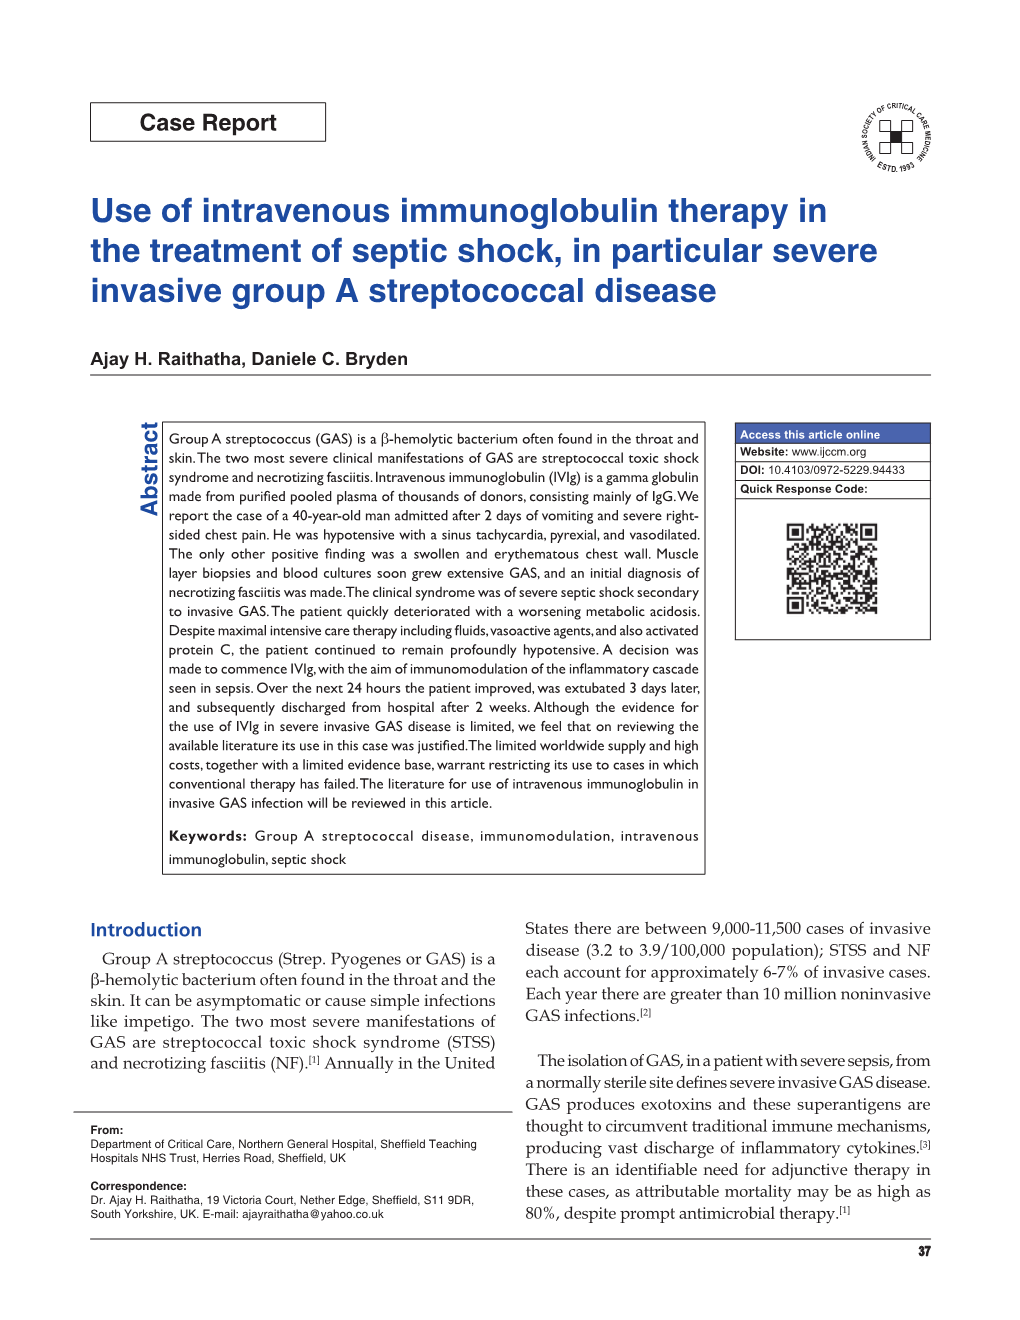 Use of Intravenous Immunoglobulin Therapy in the Treatment of Septic Shock, in Particular Severe Invasive Group a Streptococcal Disease